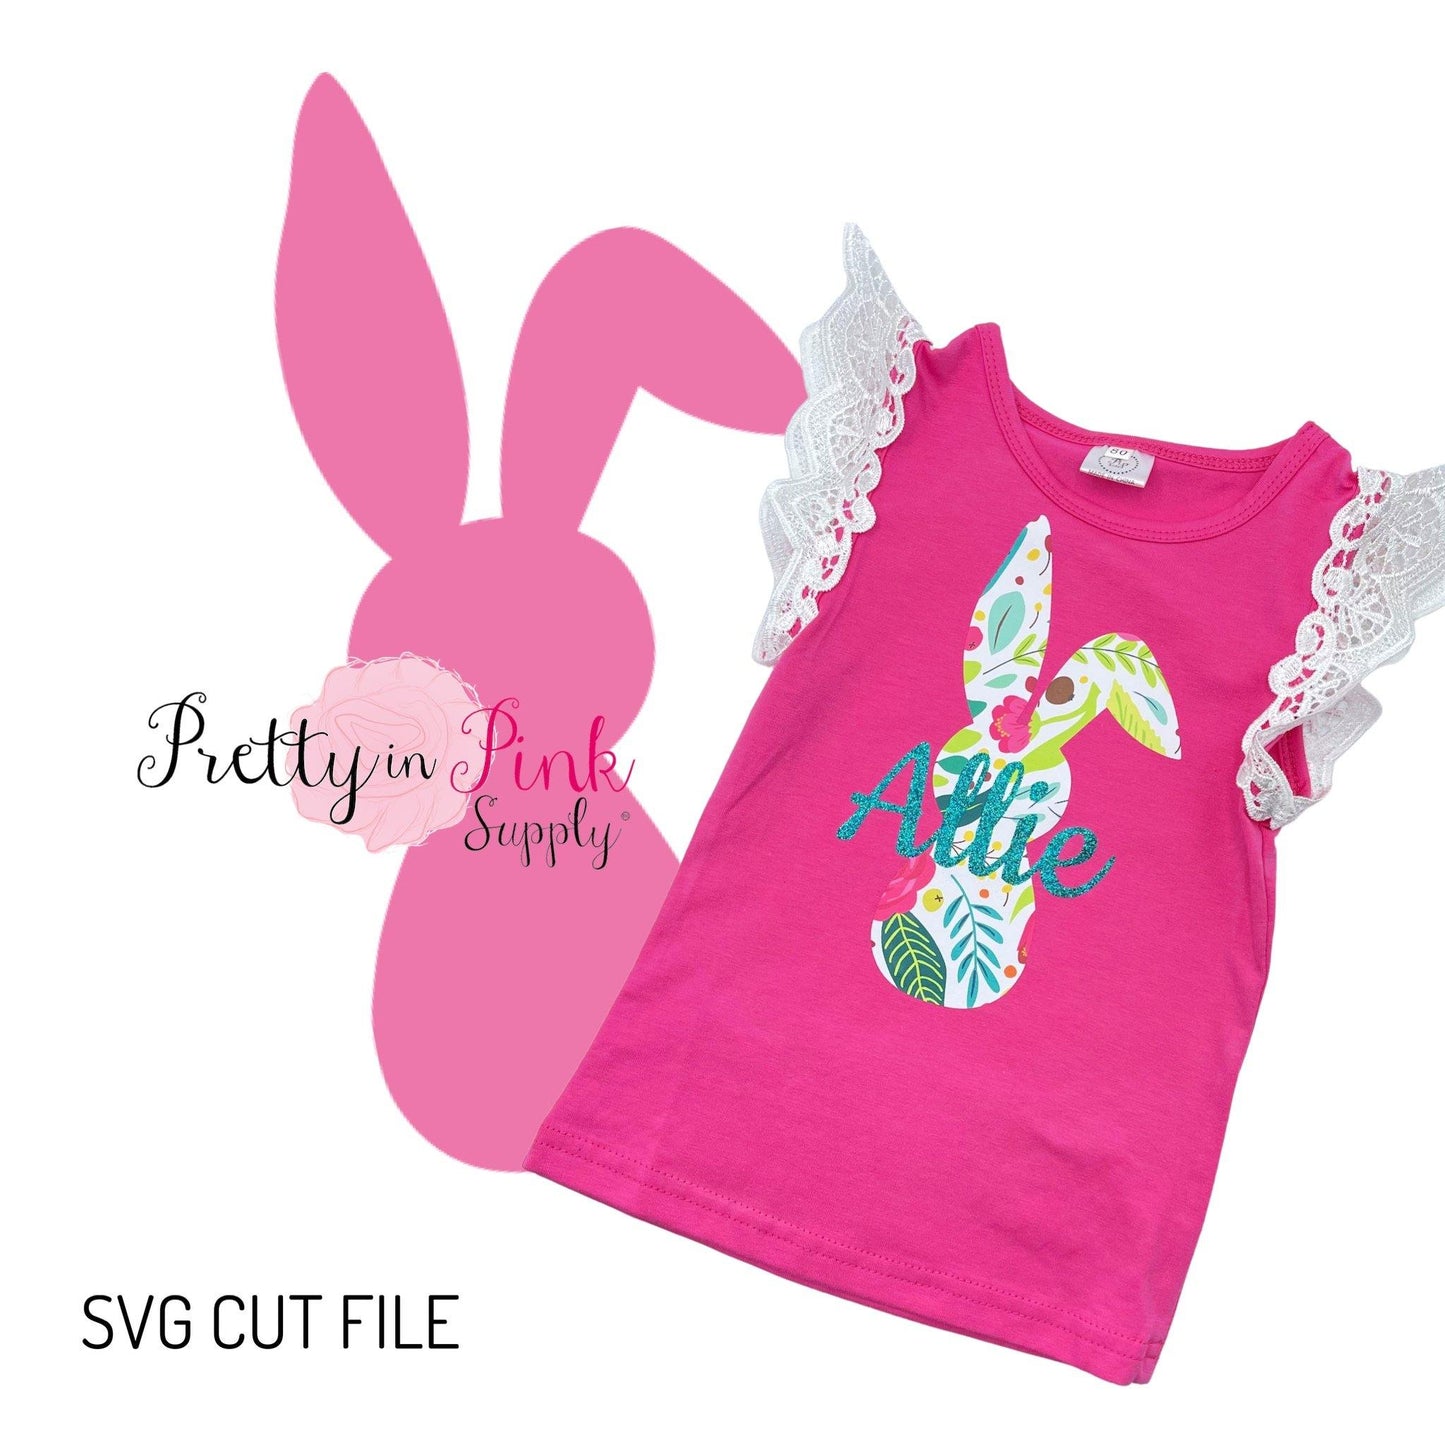 Bunny Silhouette Cut File SVG Download - Pretty in Pink Supply